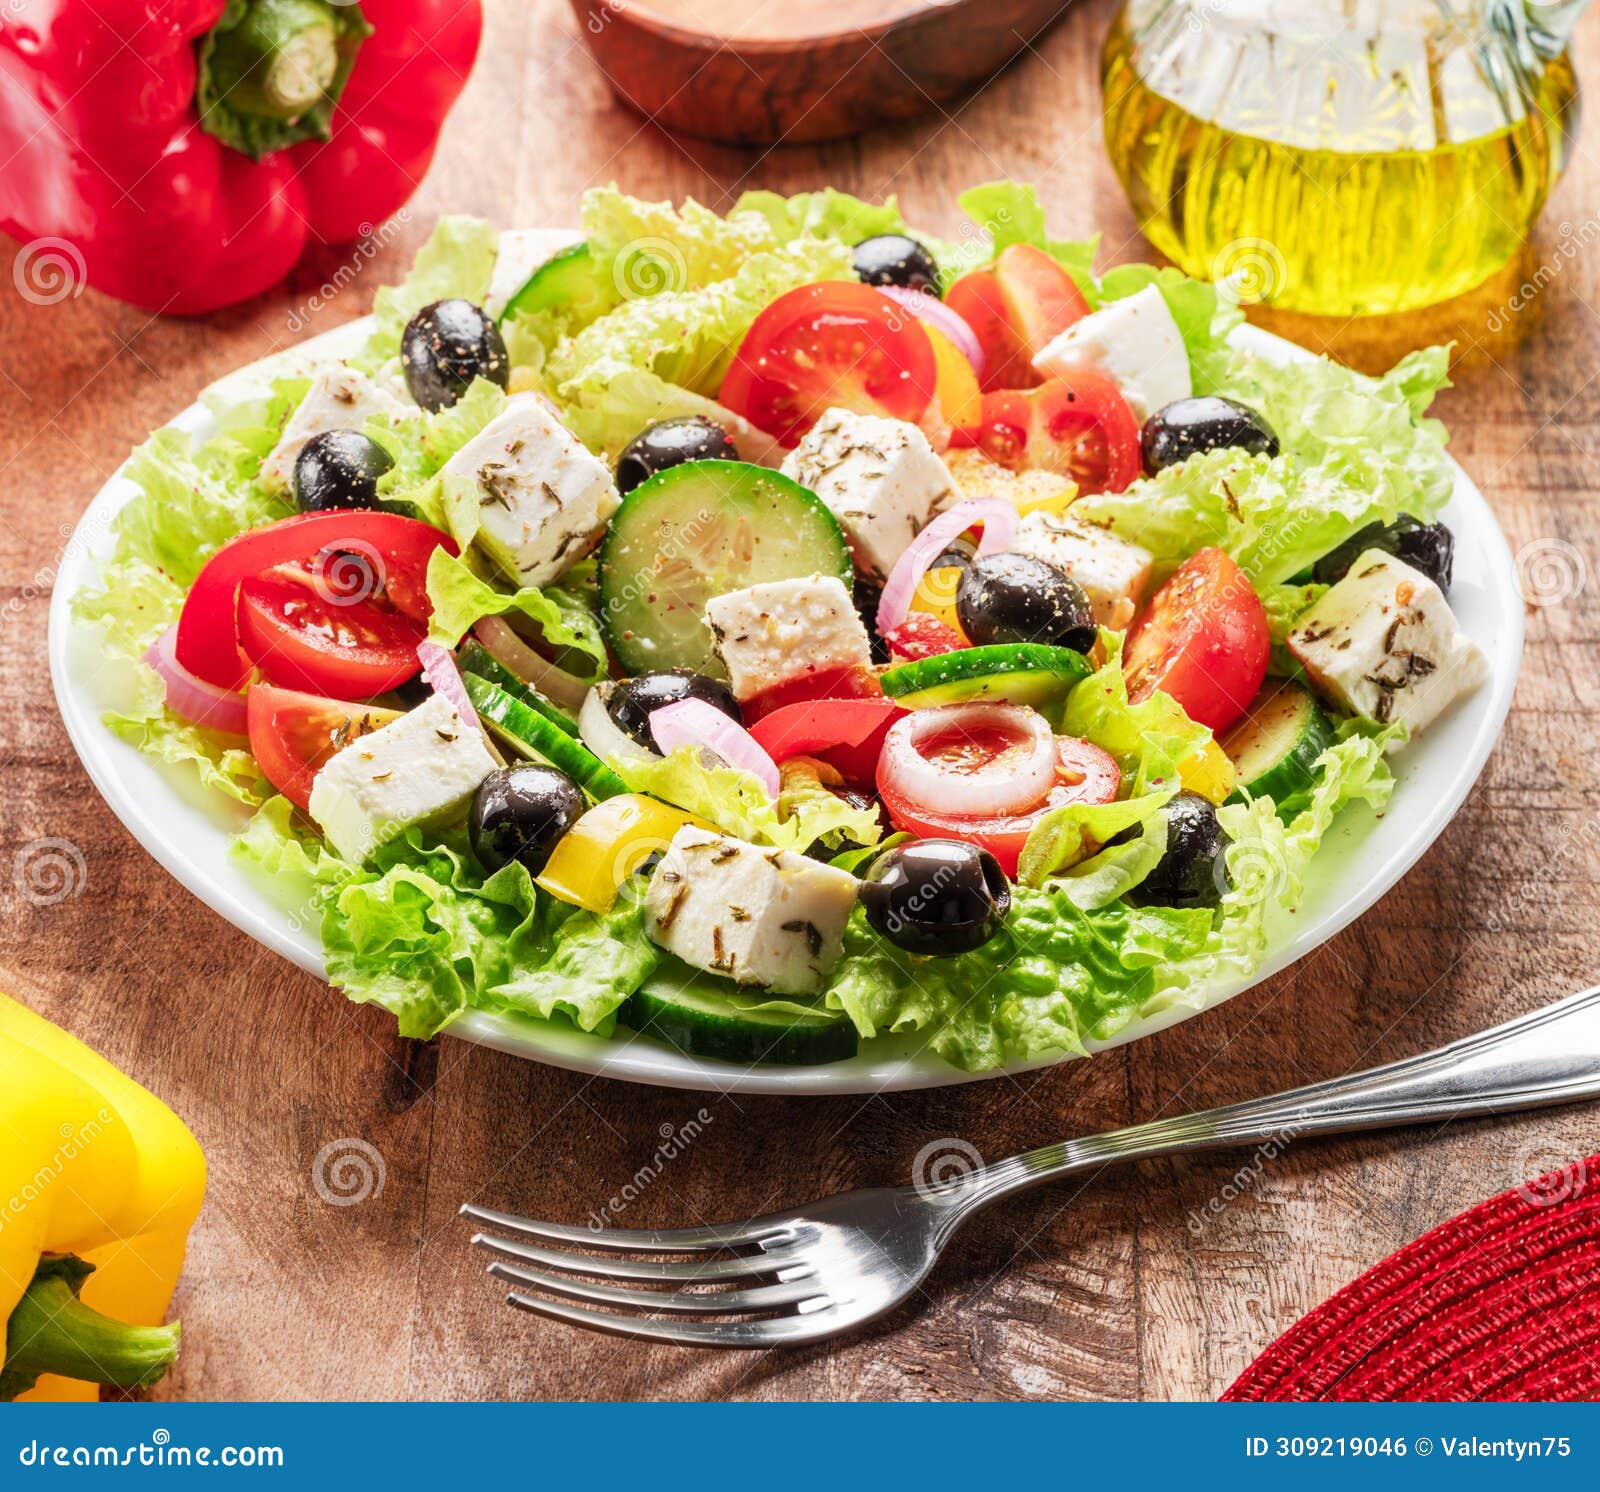 greek salad on wooden table served and ready to eat